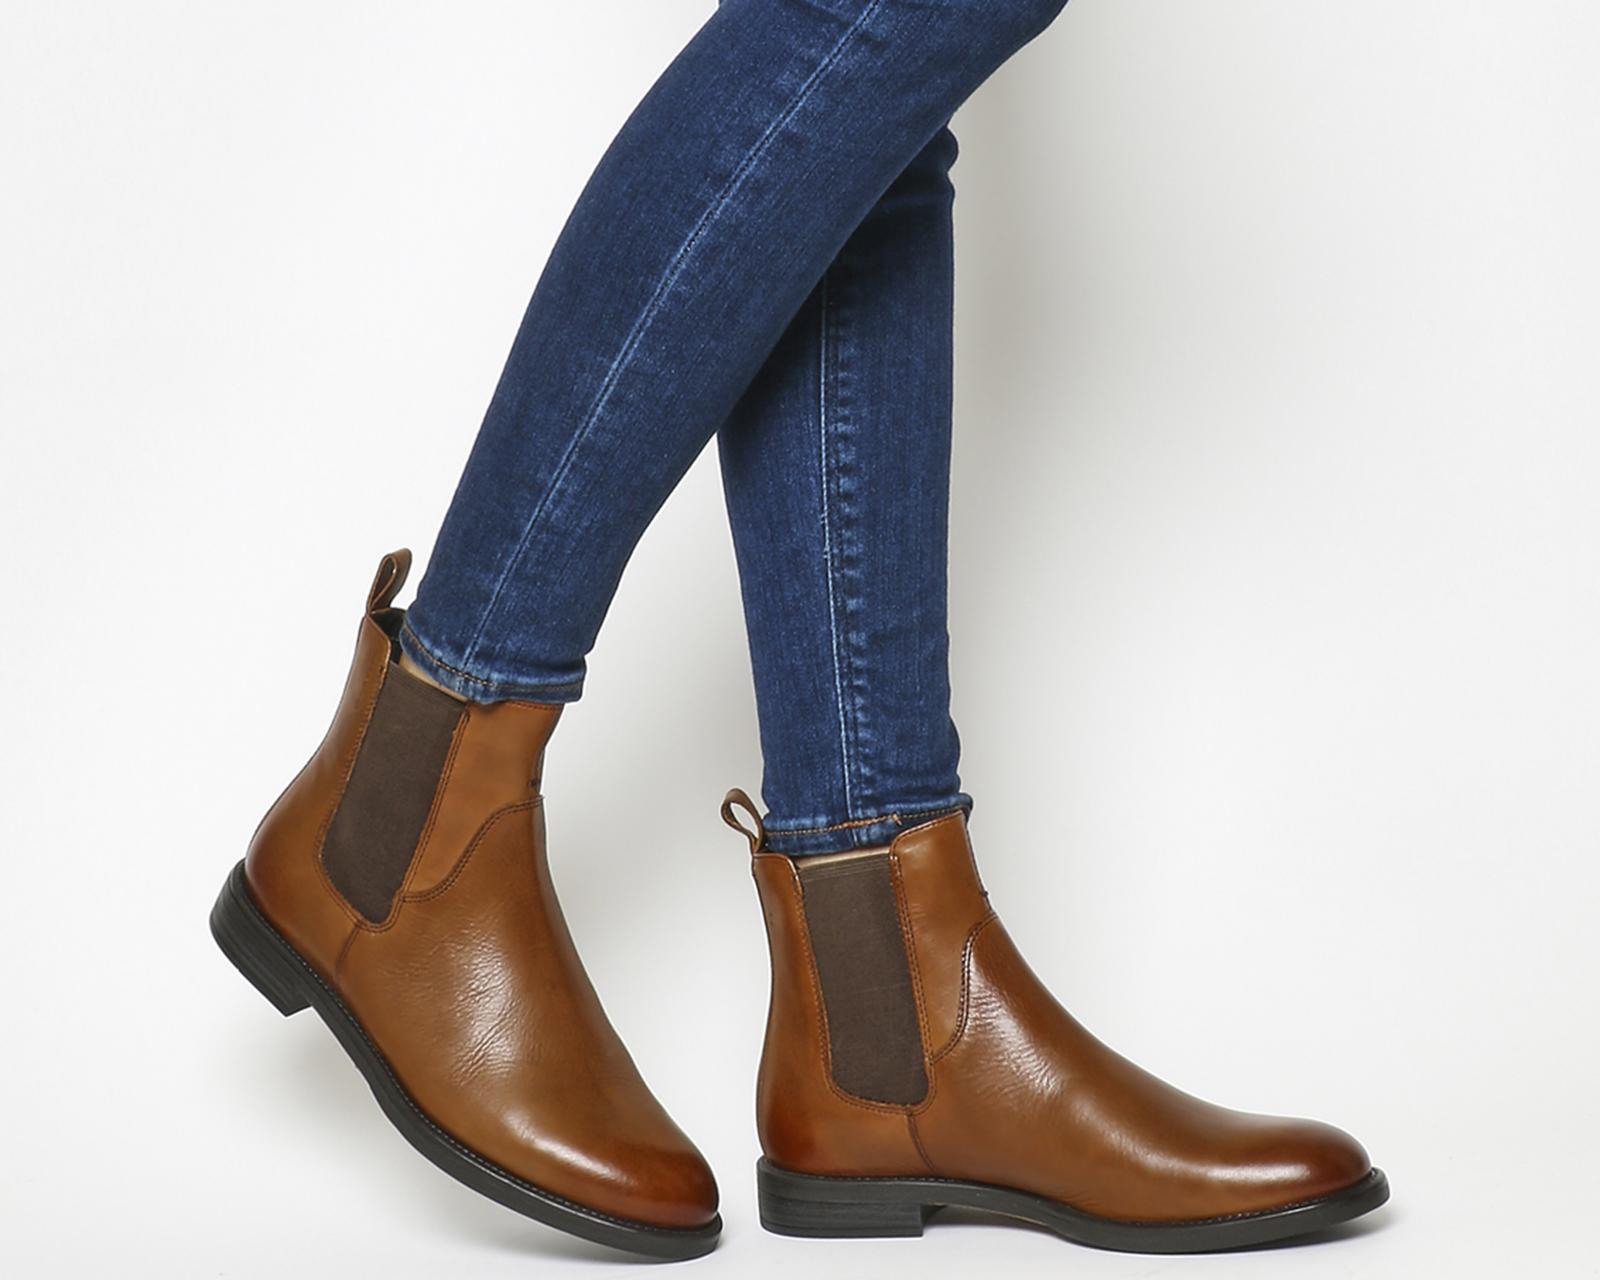 afregning omgive Feed på Vagabond Amina Chelsea Leather Boots in Cognac (Brown) - Lyst